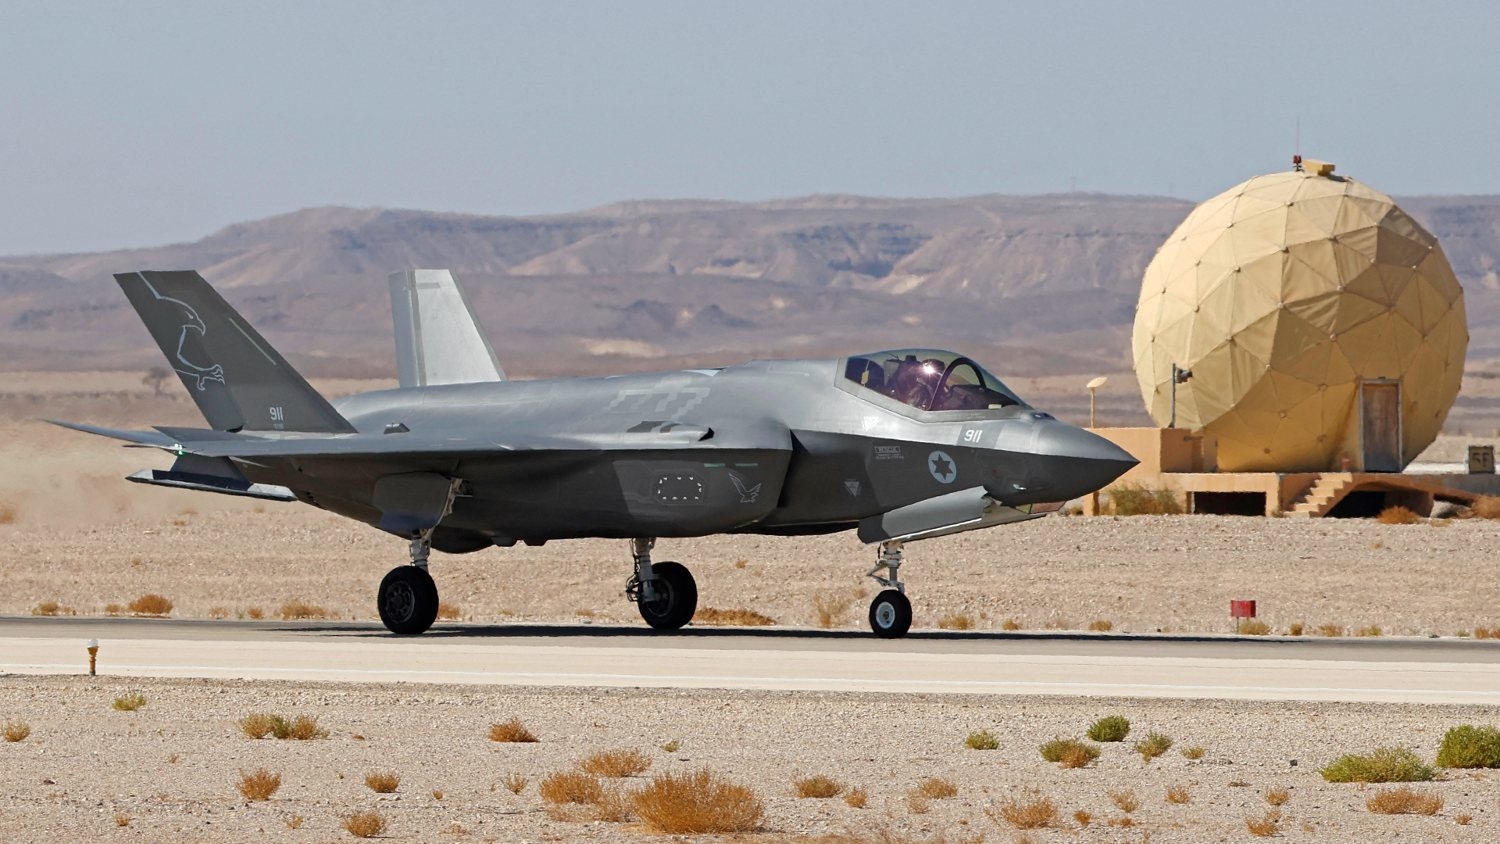 An Israeli air force F-35 fighter lands during an air defence exercise at the Ovda air force base, north of the Israeli city of Eilat, on 24 October 2021.